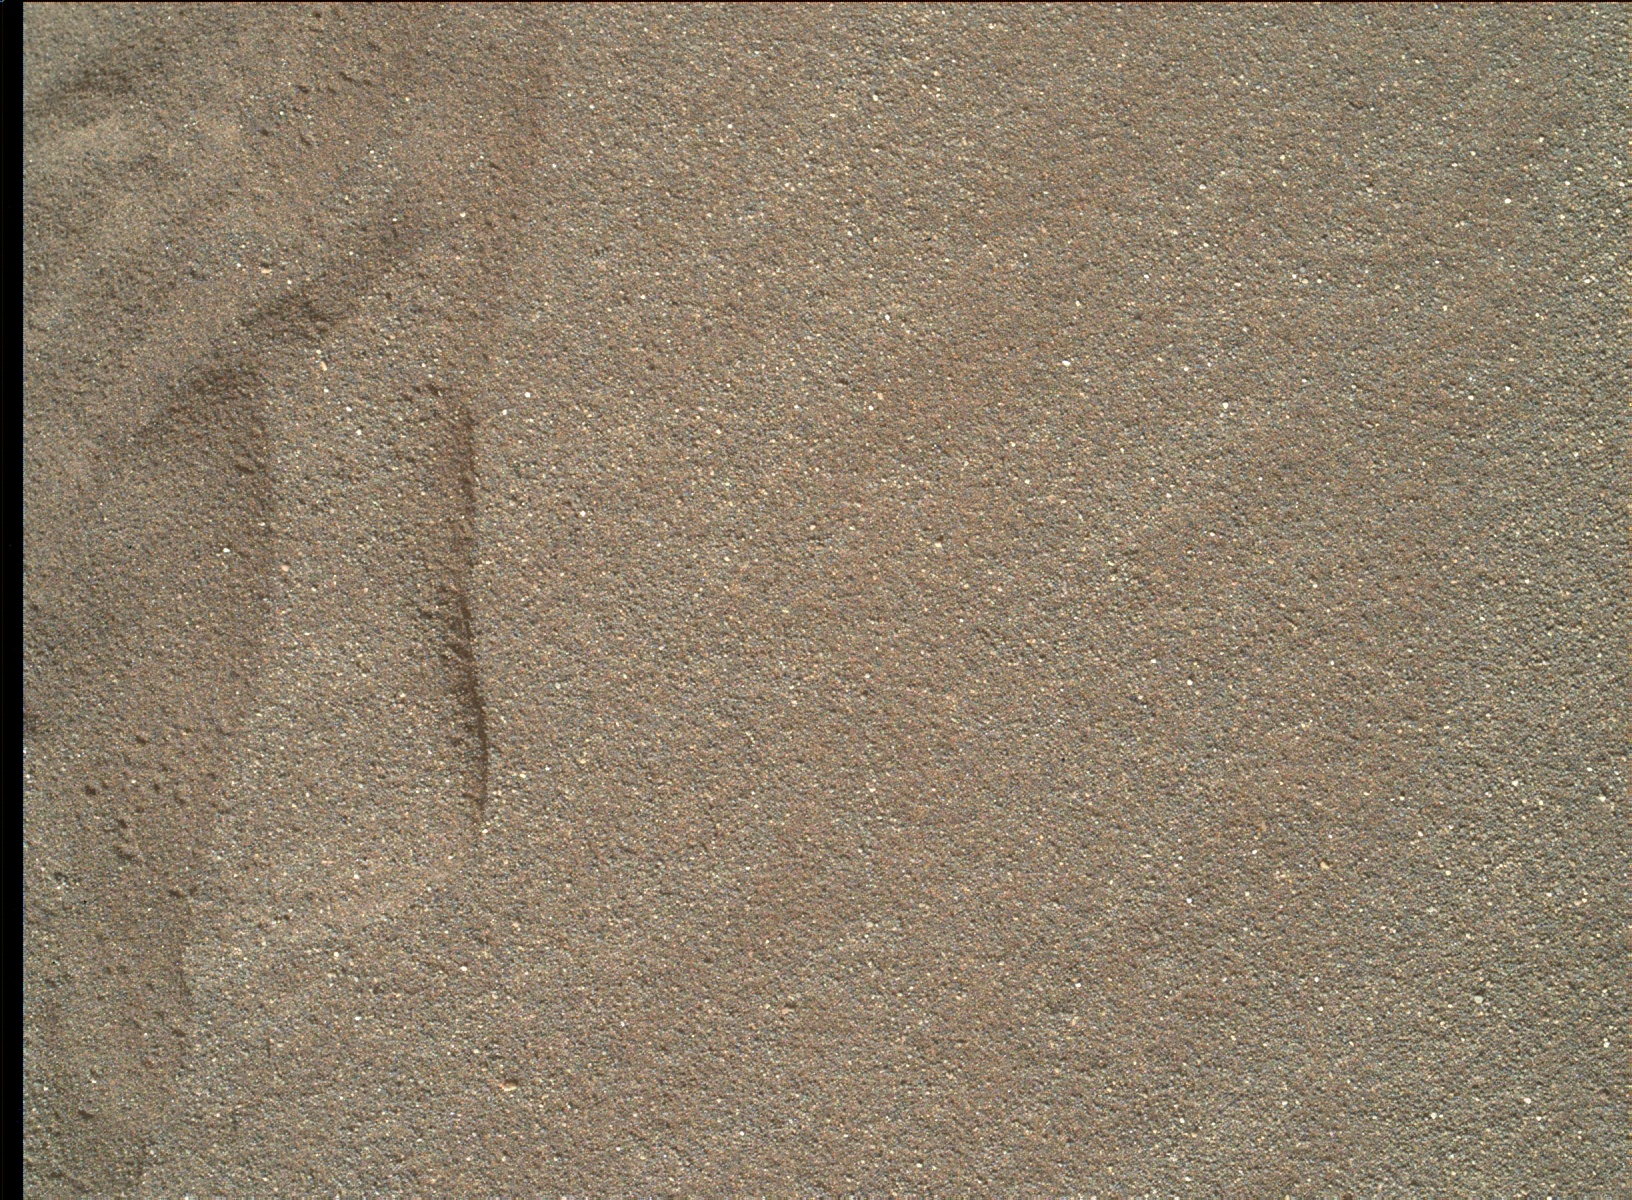 Nasa's Mars rover Curiosity acquired this image using its Mars Hand Lens Imager (MAHLI) on Sol 1749